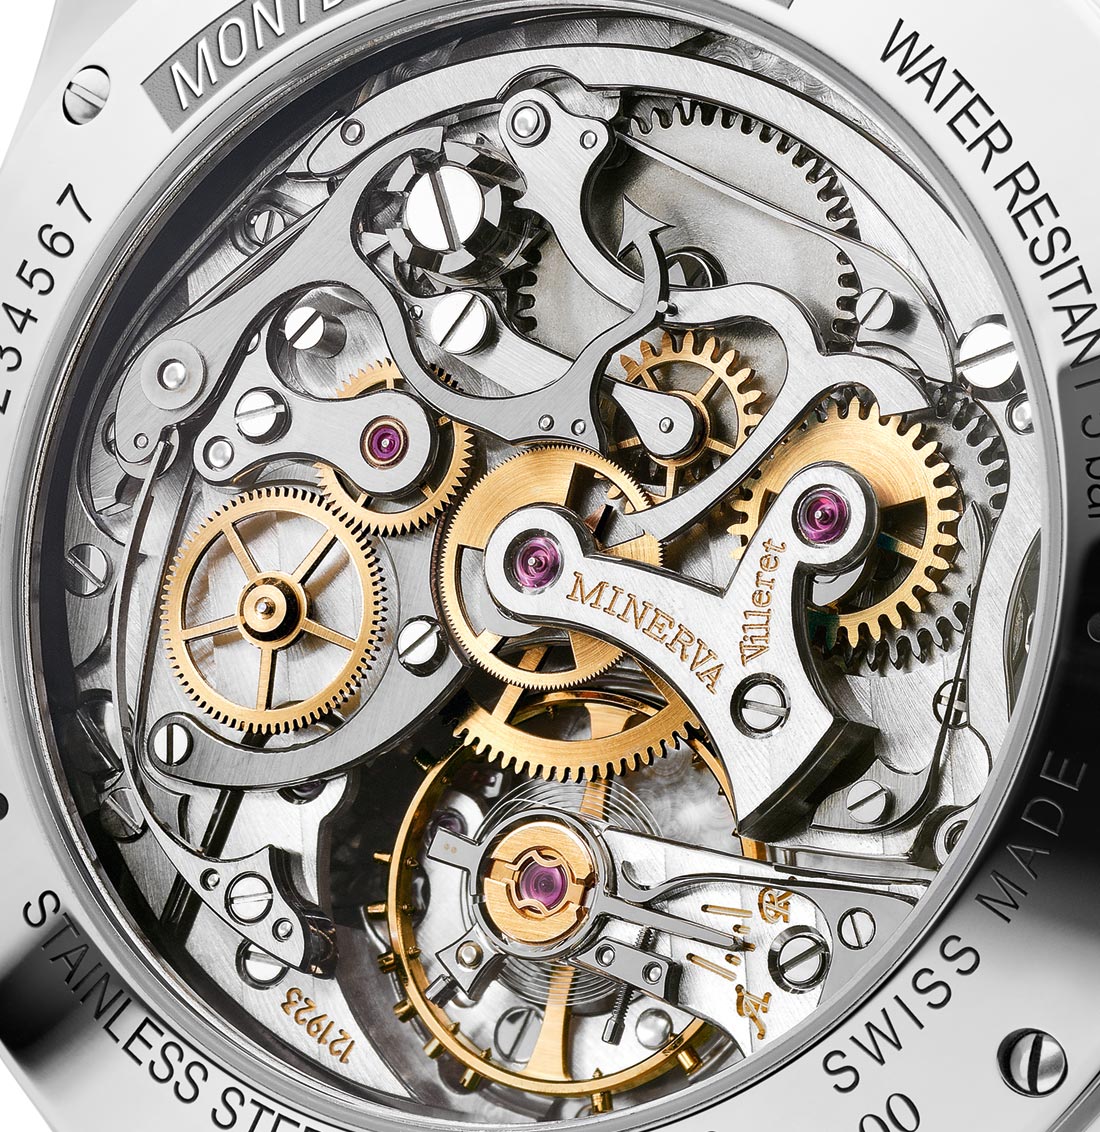 Montblanc Heritage Manufacture Pulsometer movement